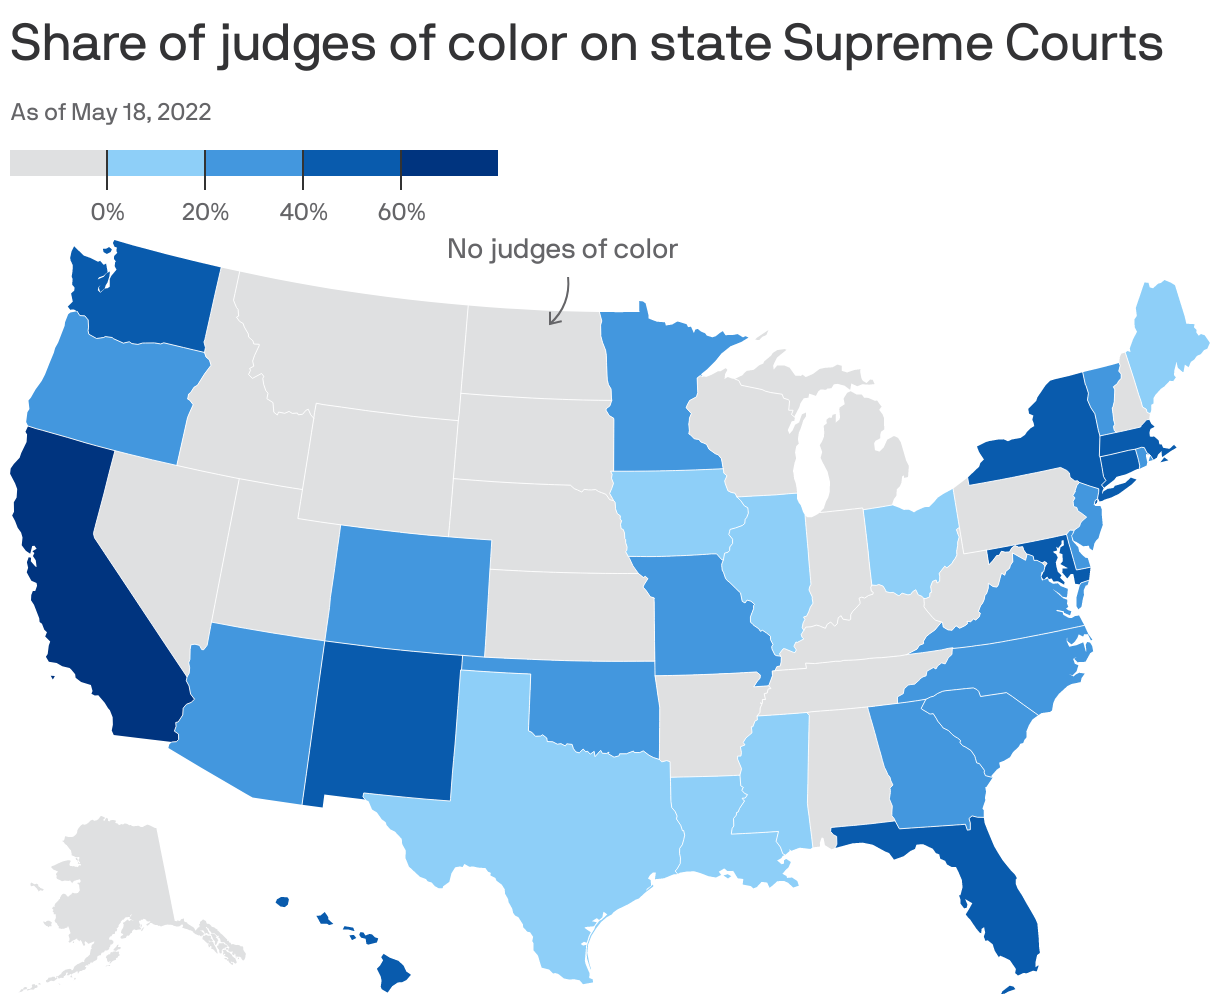 Share of judges of color on state Supreme Courts